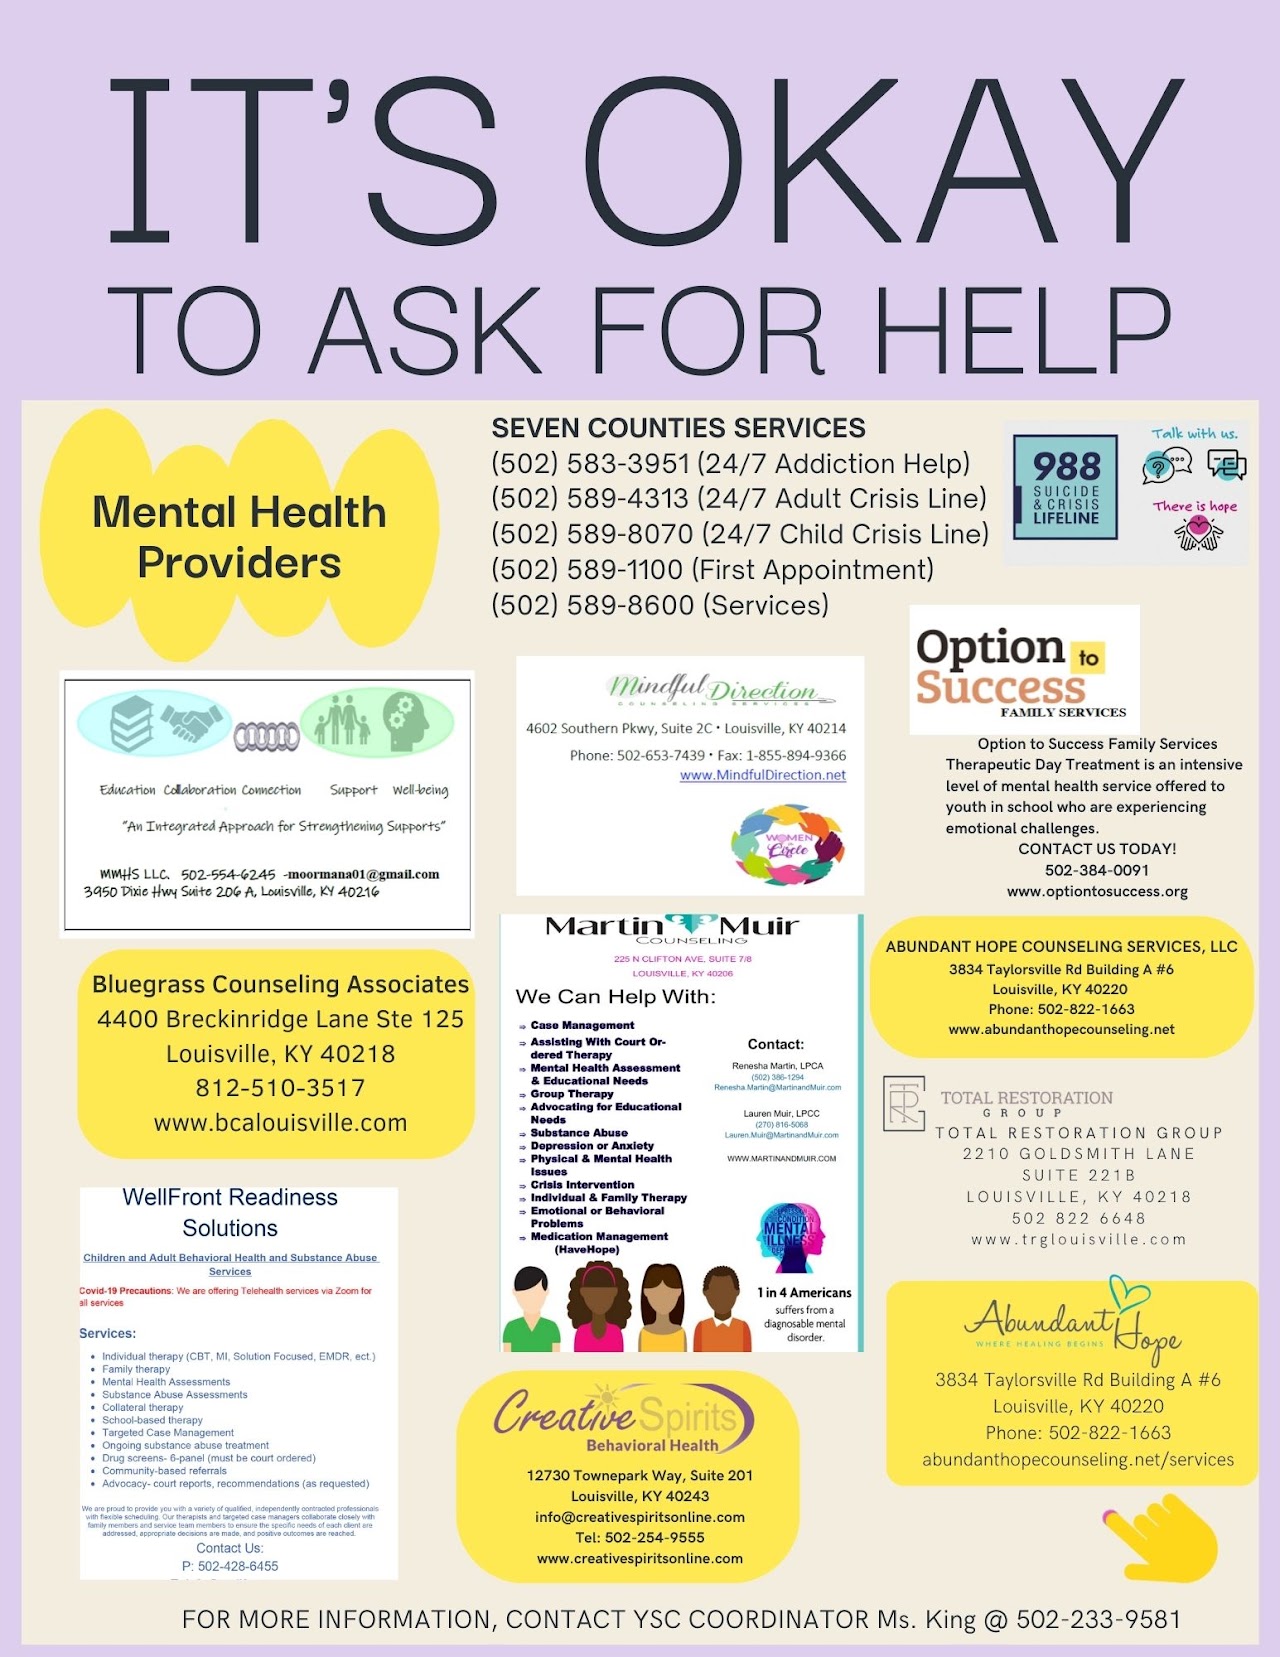 It's ok to ask for help flyer